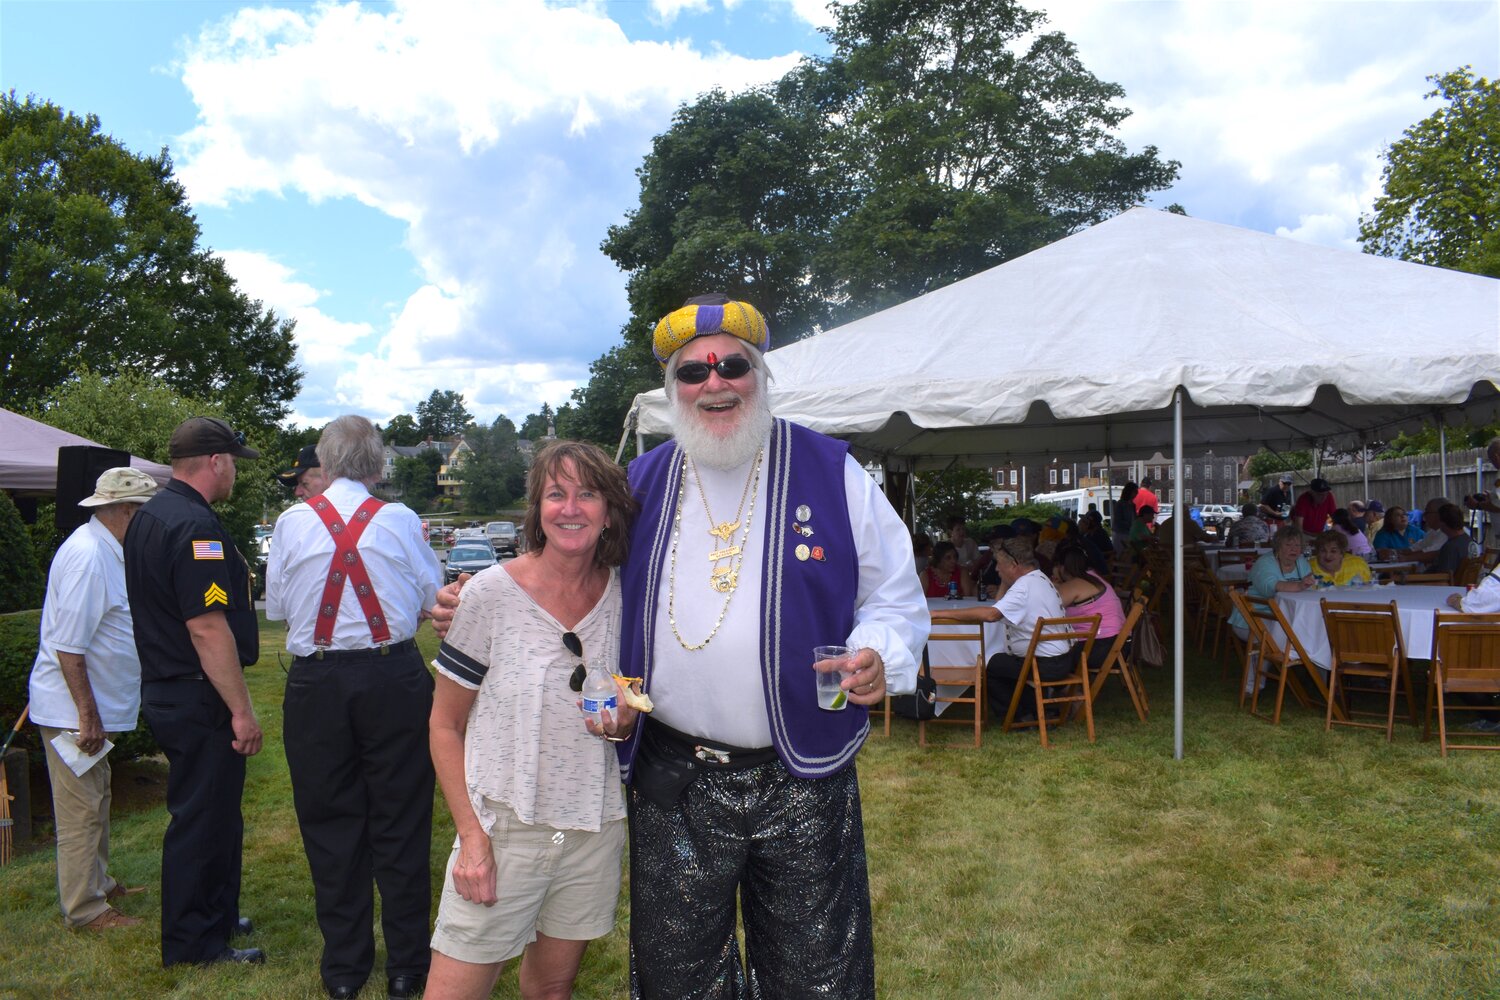 Carol Brown with a member of the Shriners parade crew at the post Parade cookout at the Manchester Masonic Hall in 2019, after the Town of Essex Bicentennial Parade.